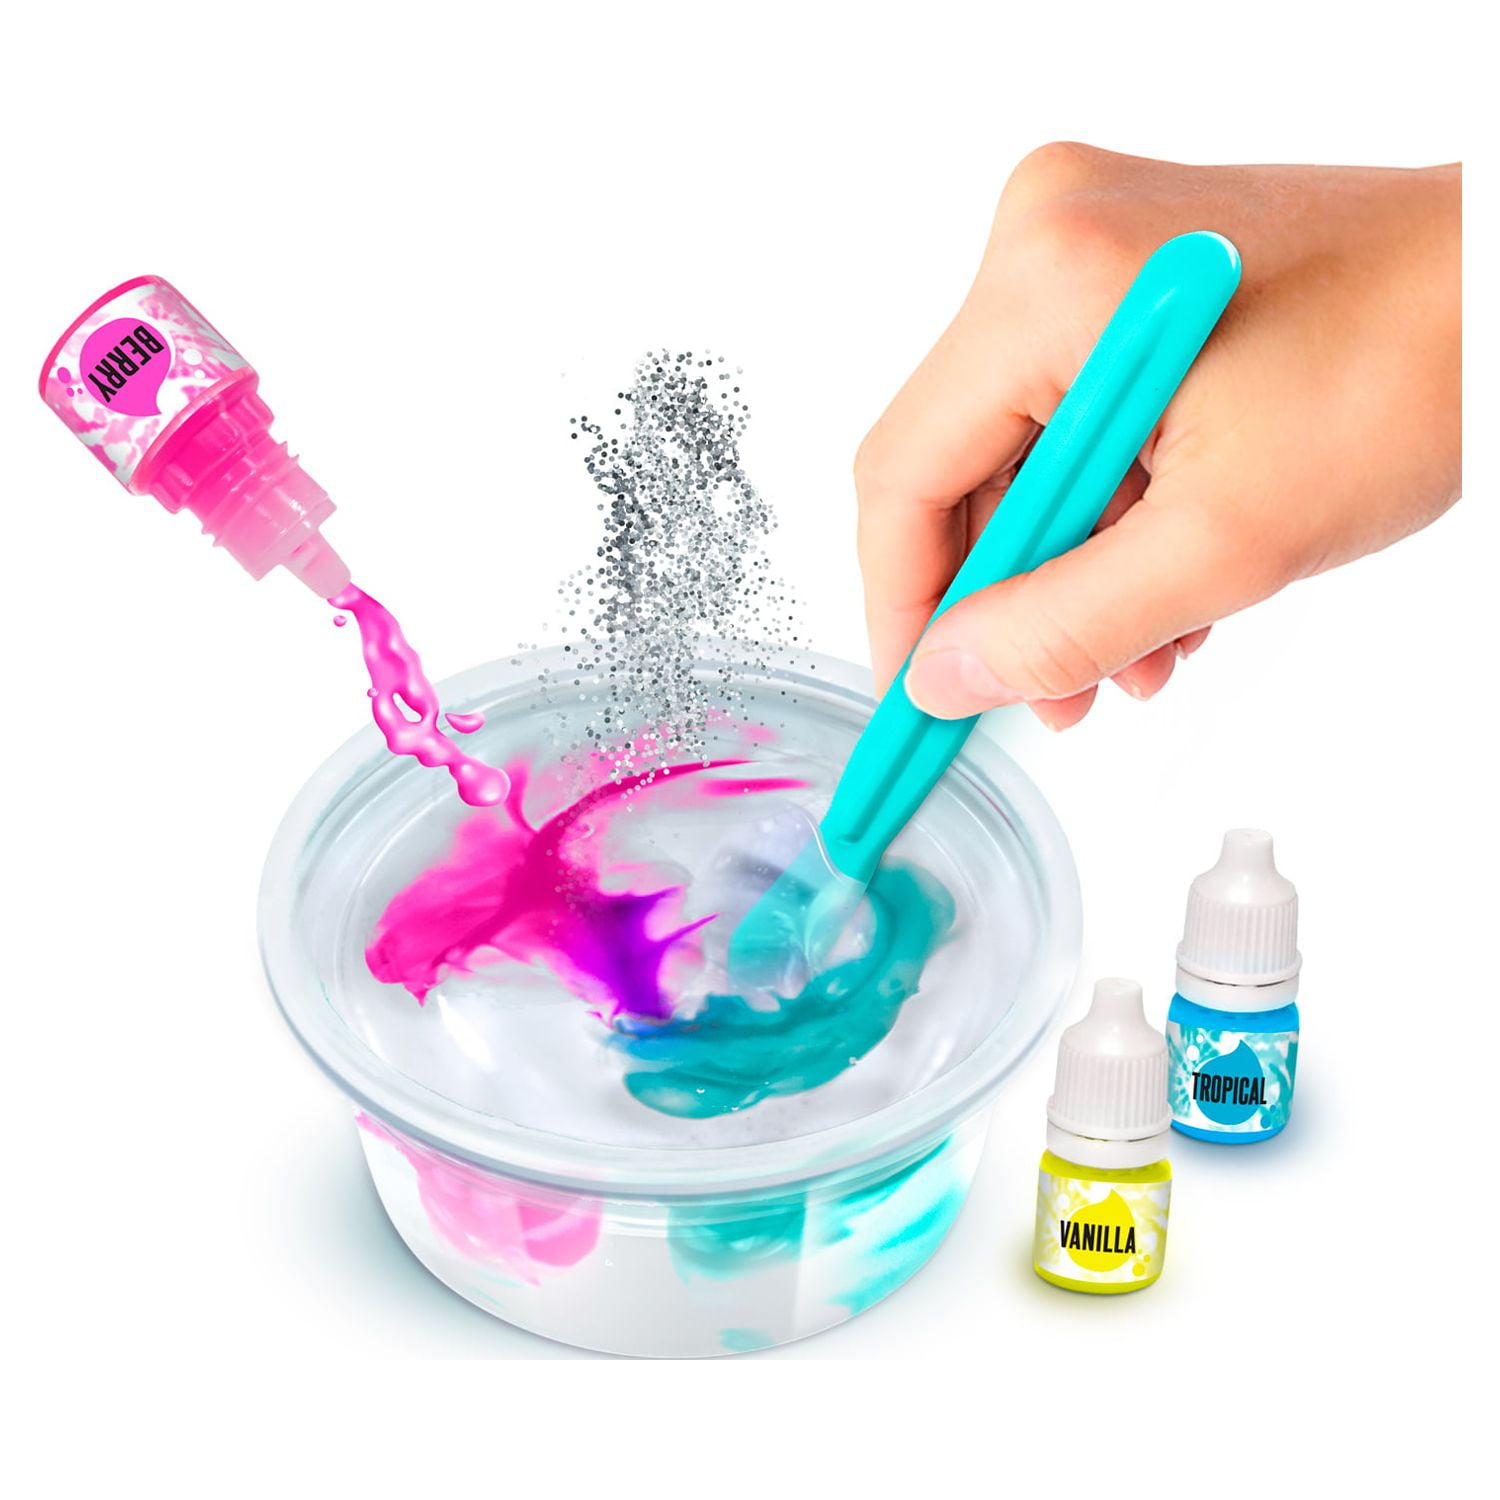 Canal Toys Premade Tie Dye Slime Kit